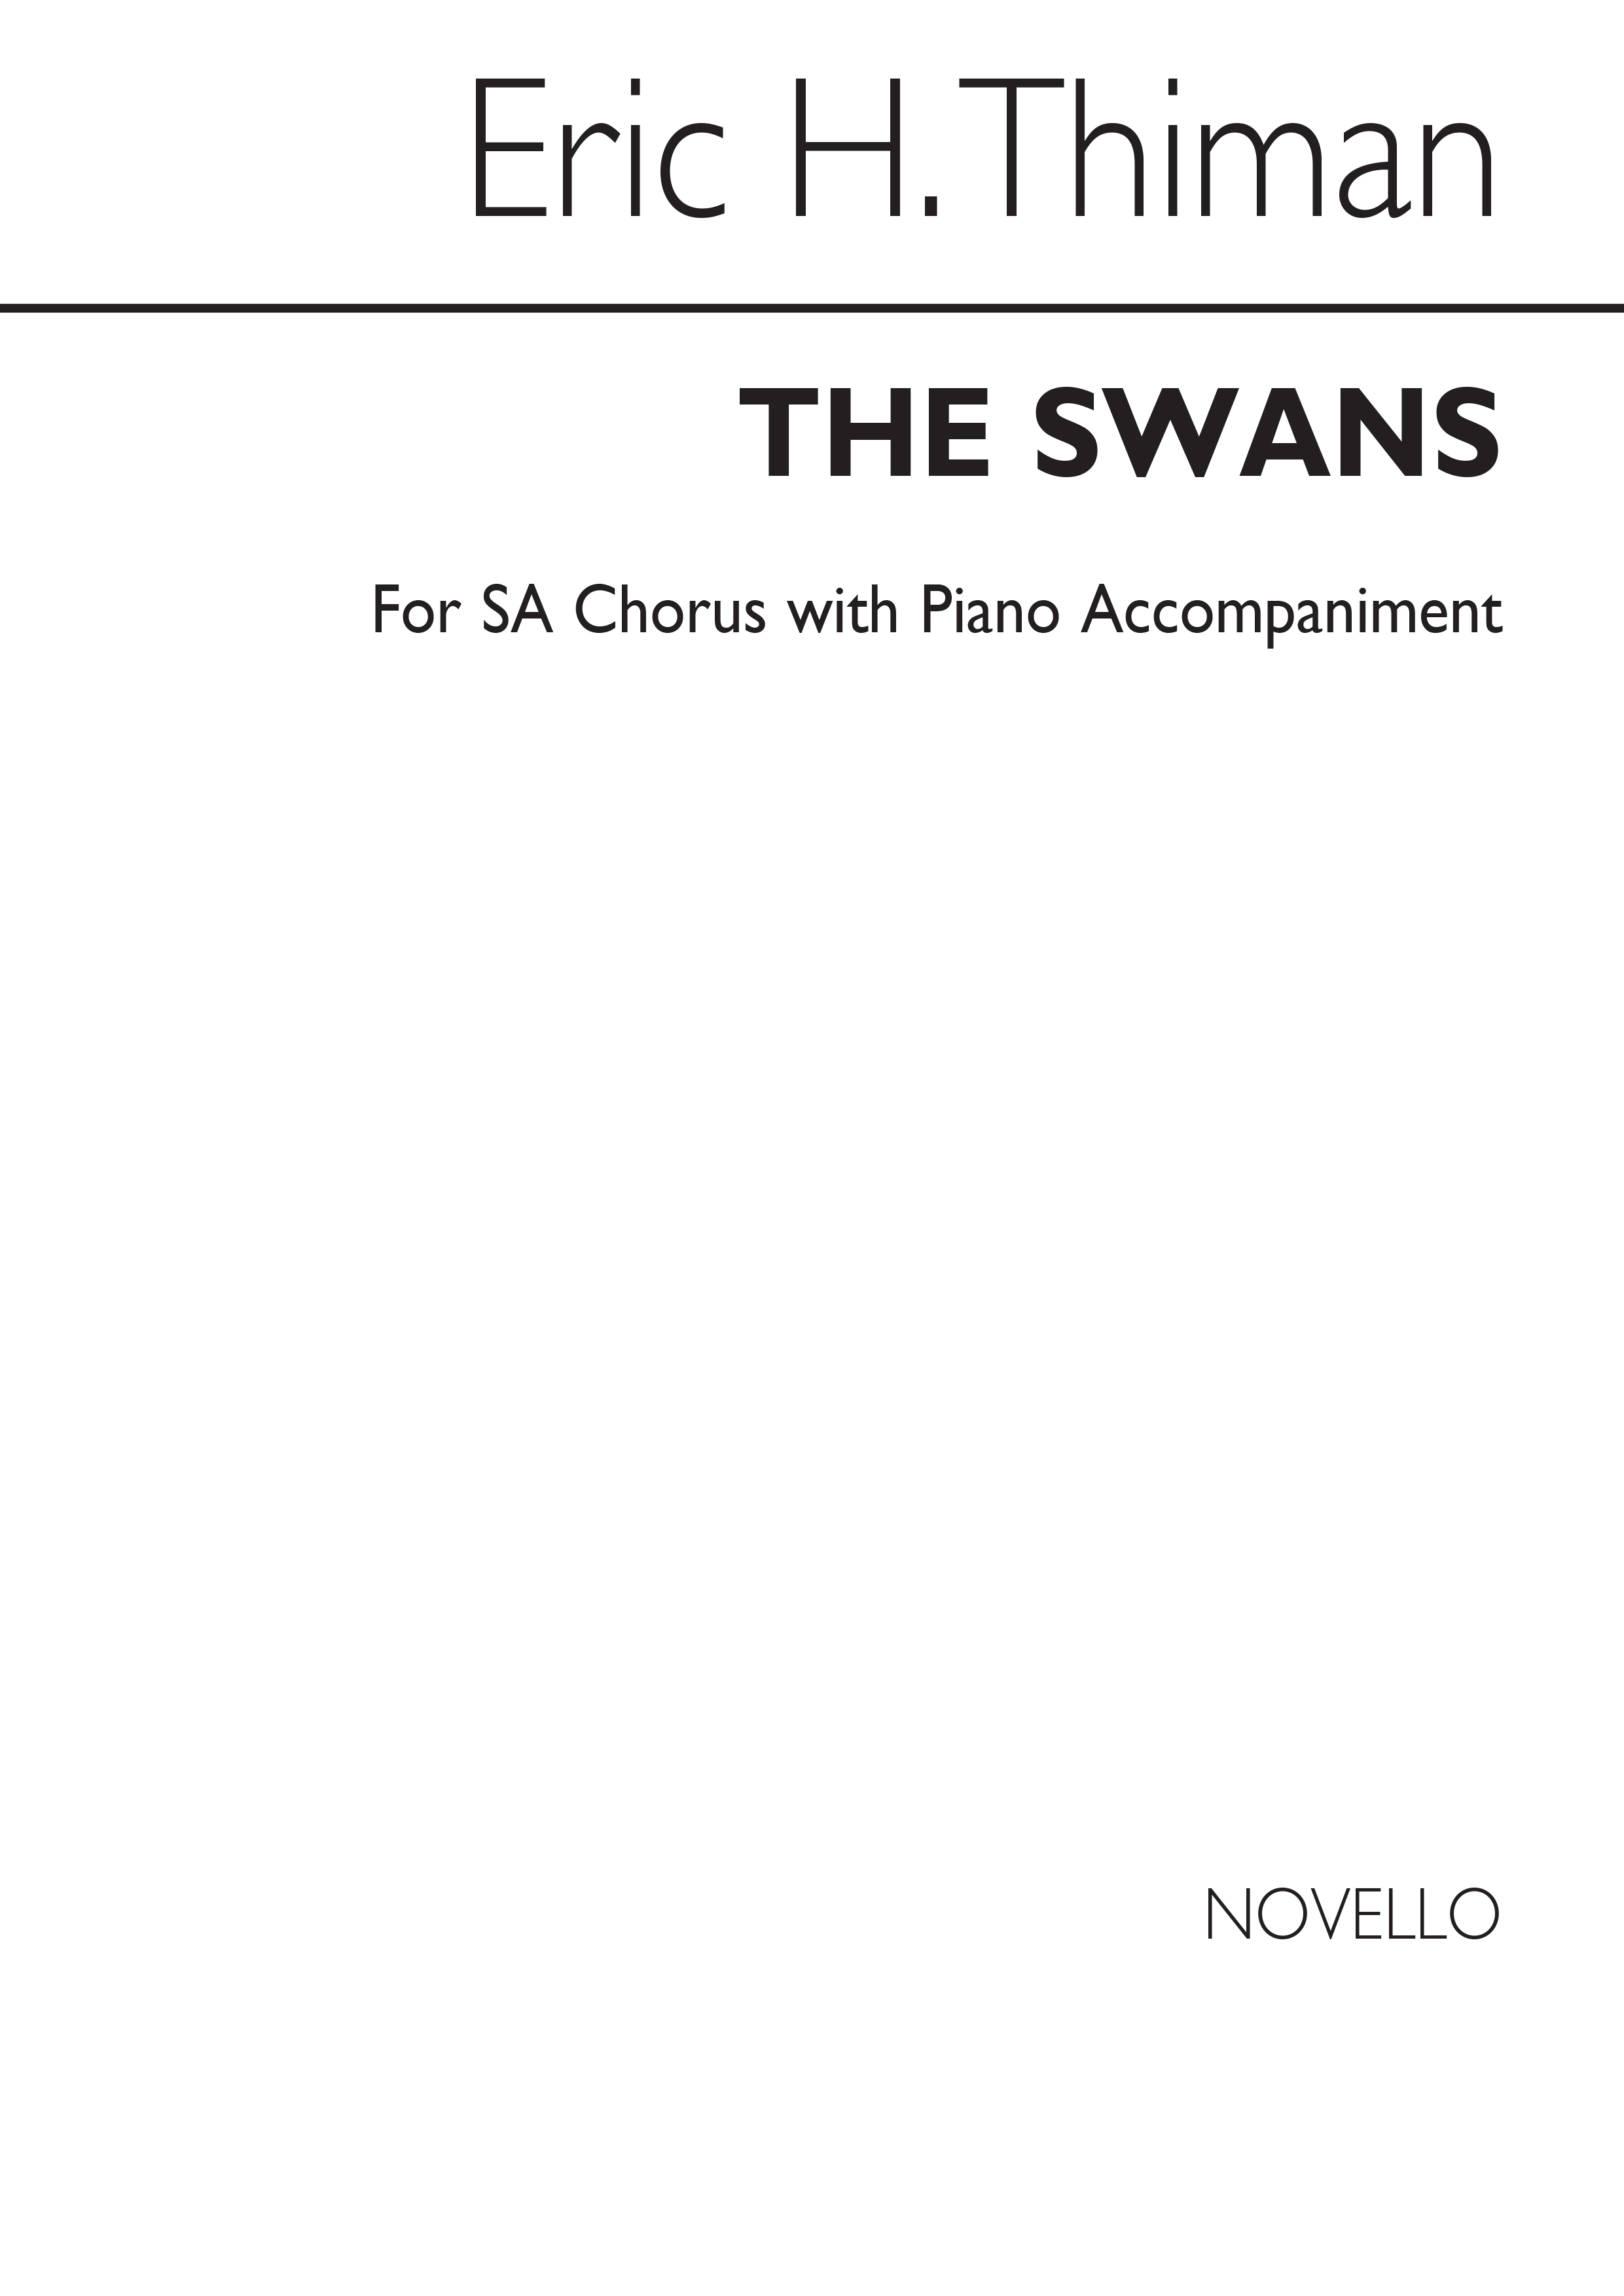 Thiman: The Swans for SA Chorus with Piano acc.